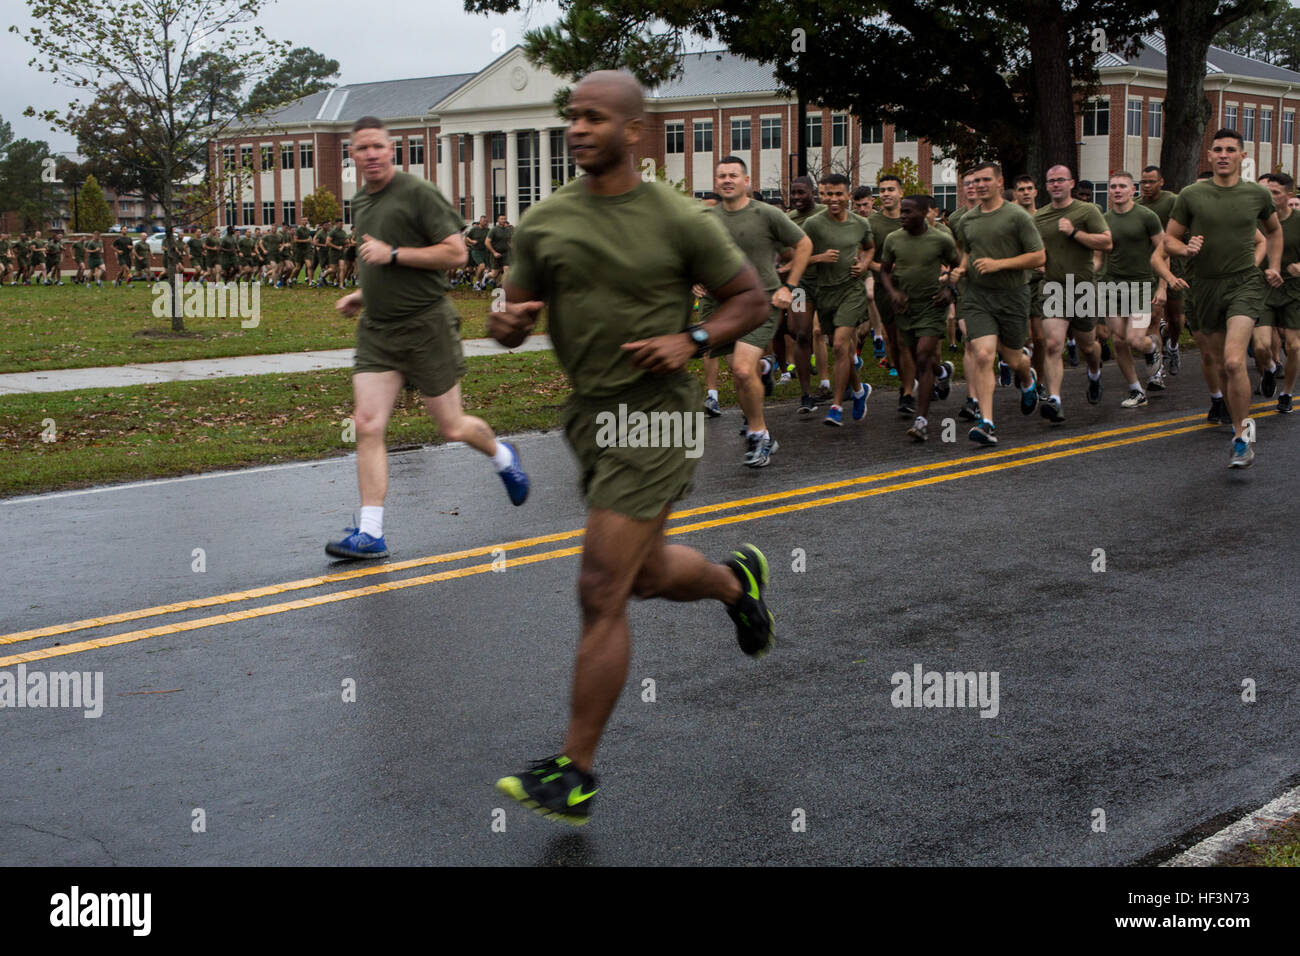 U.S. Marines and Sailors assigned to 2nd Marine Aircraft Wing participate in a formation run on Marine Corps Air Station Cherry Point, N.C., Nov. 9, 2015. The run was conducted in celebration of the Marine Corps' 240th Birthday. (U.S. Marine Corps photo by Lance Cpl. Jered T. Stone/Released) 2d MAW Birthday Run 151109-M-WP334-059 Stock Photo